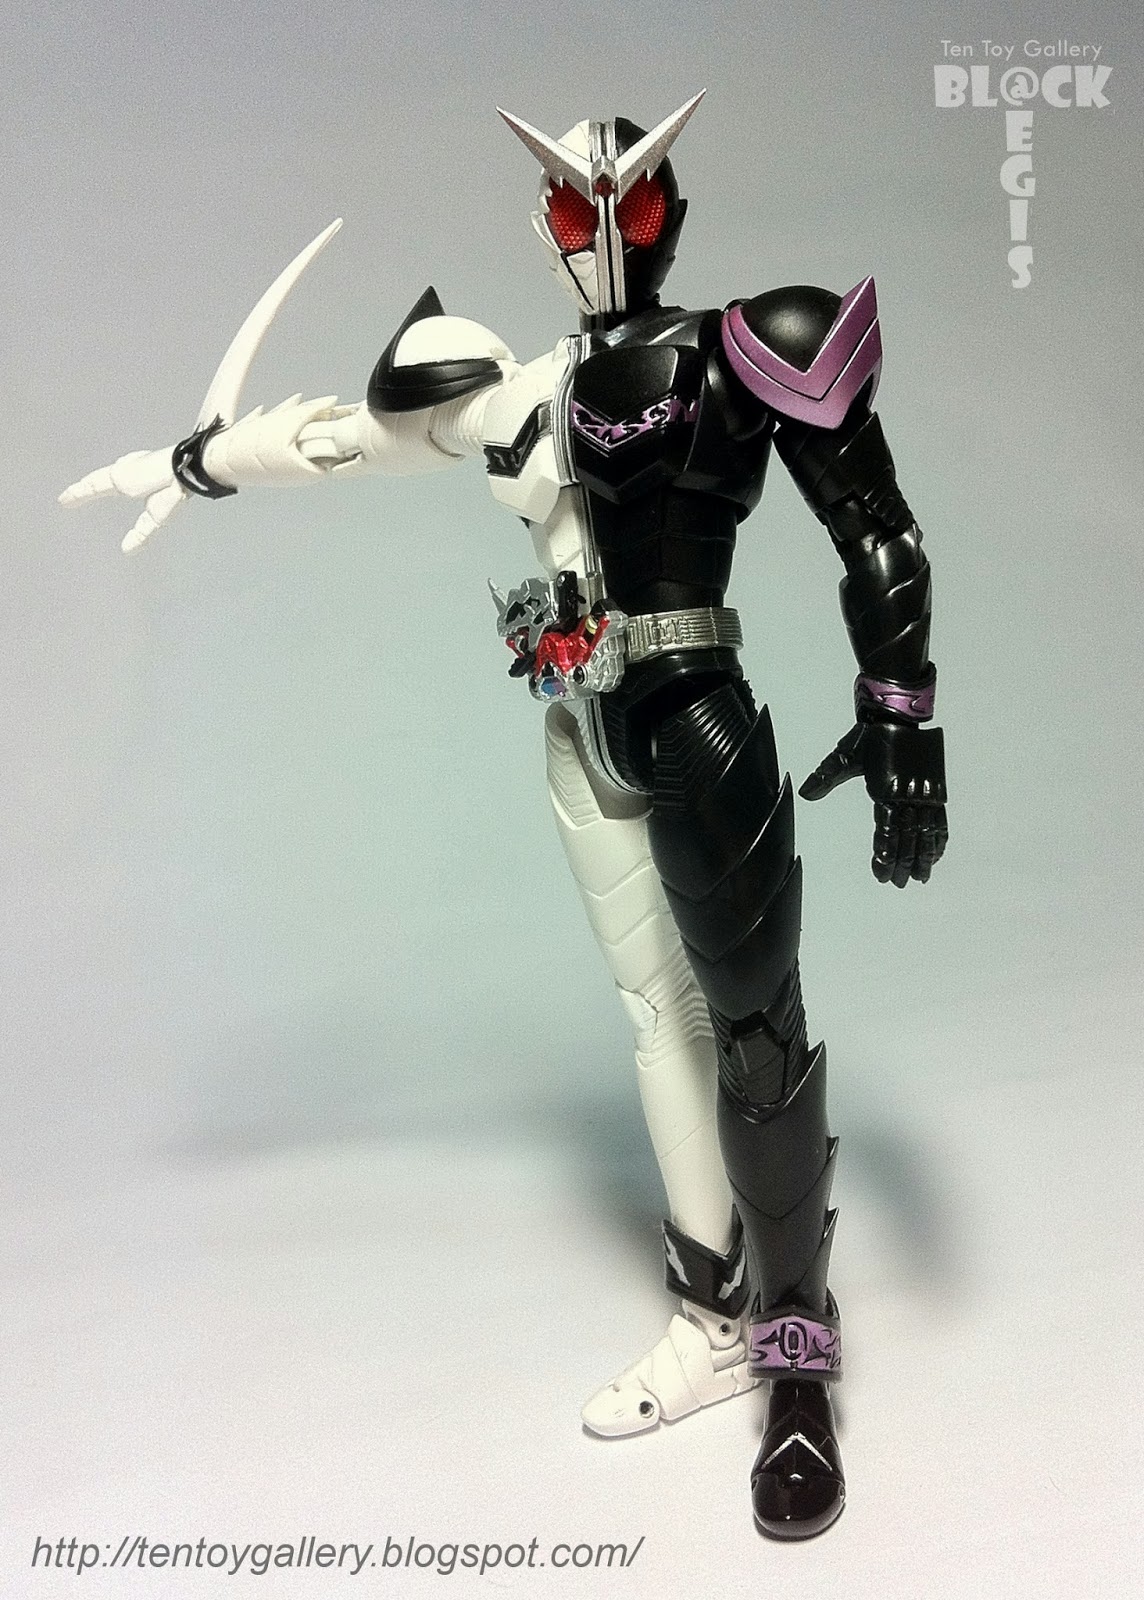 Ten Toy Gallery: Review: S.H.Figuarts Masked Rider Fang Joker